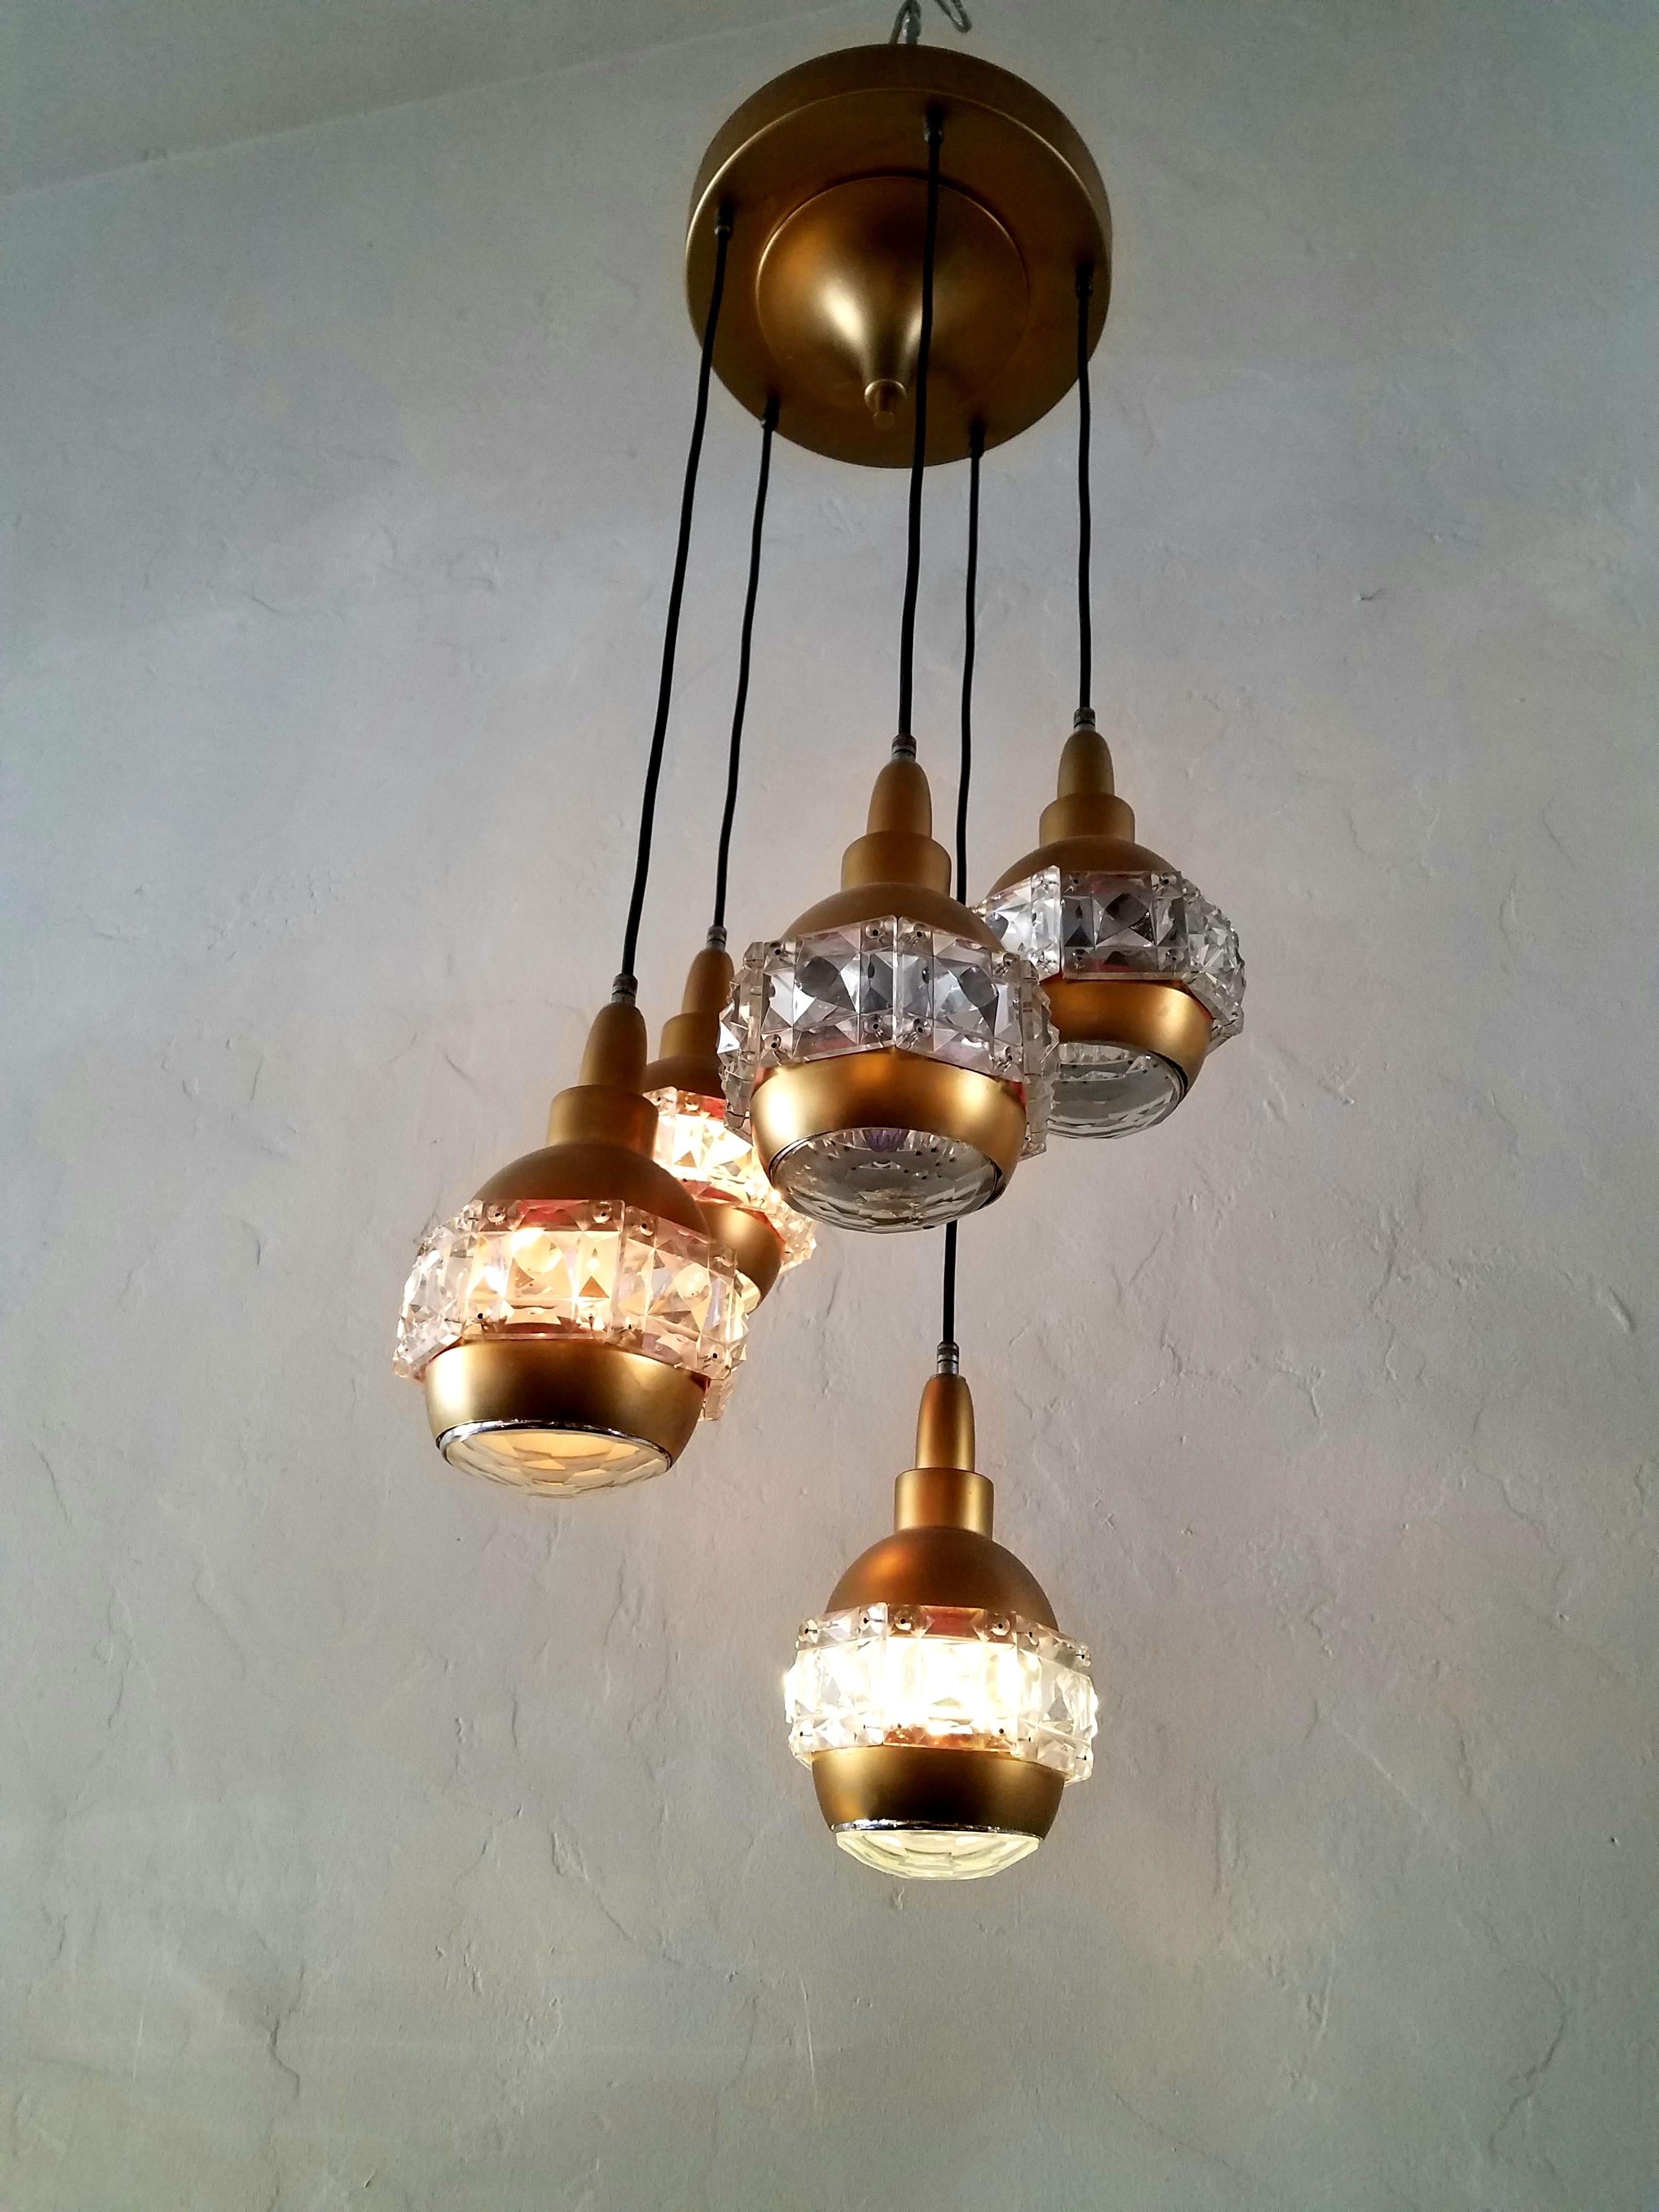 Mid-20th Century Italian Midcentury Chandelier Attributed to O'luce For Sale